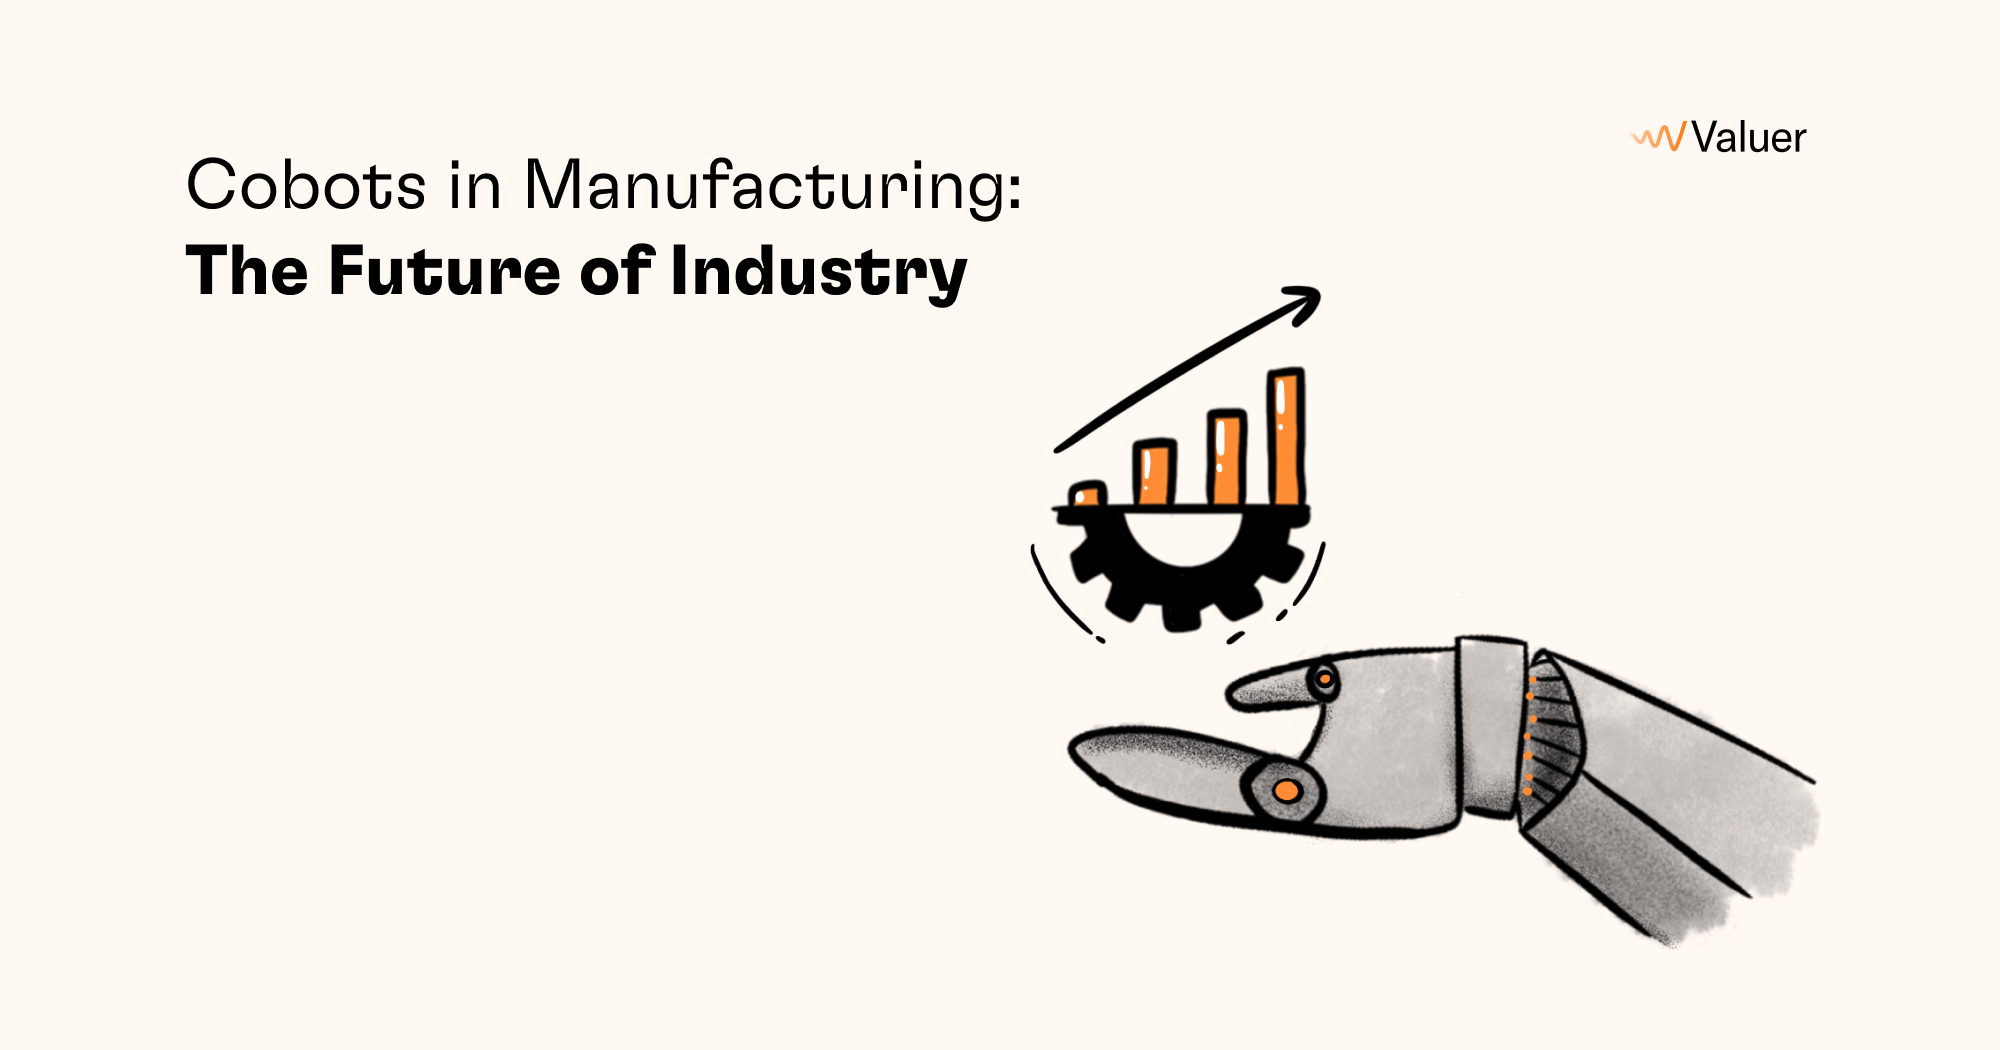 Cobots in Manufacturing: The Future of Industry